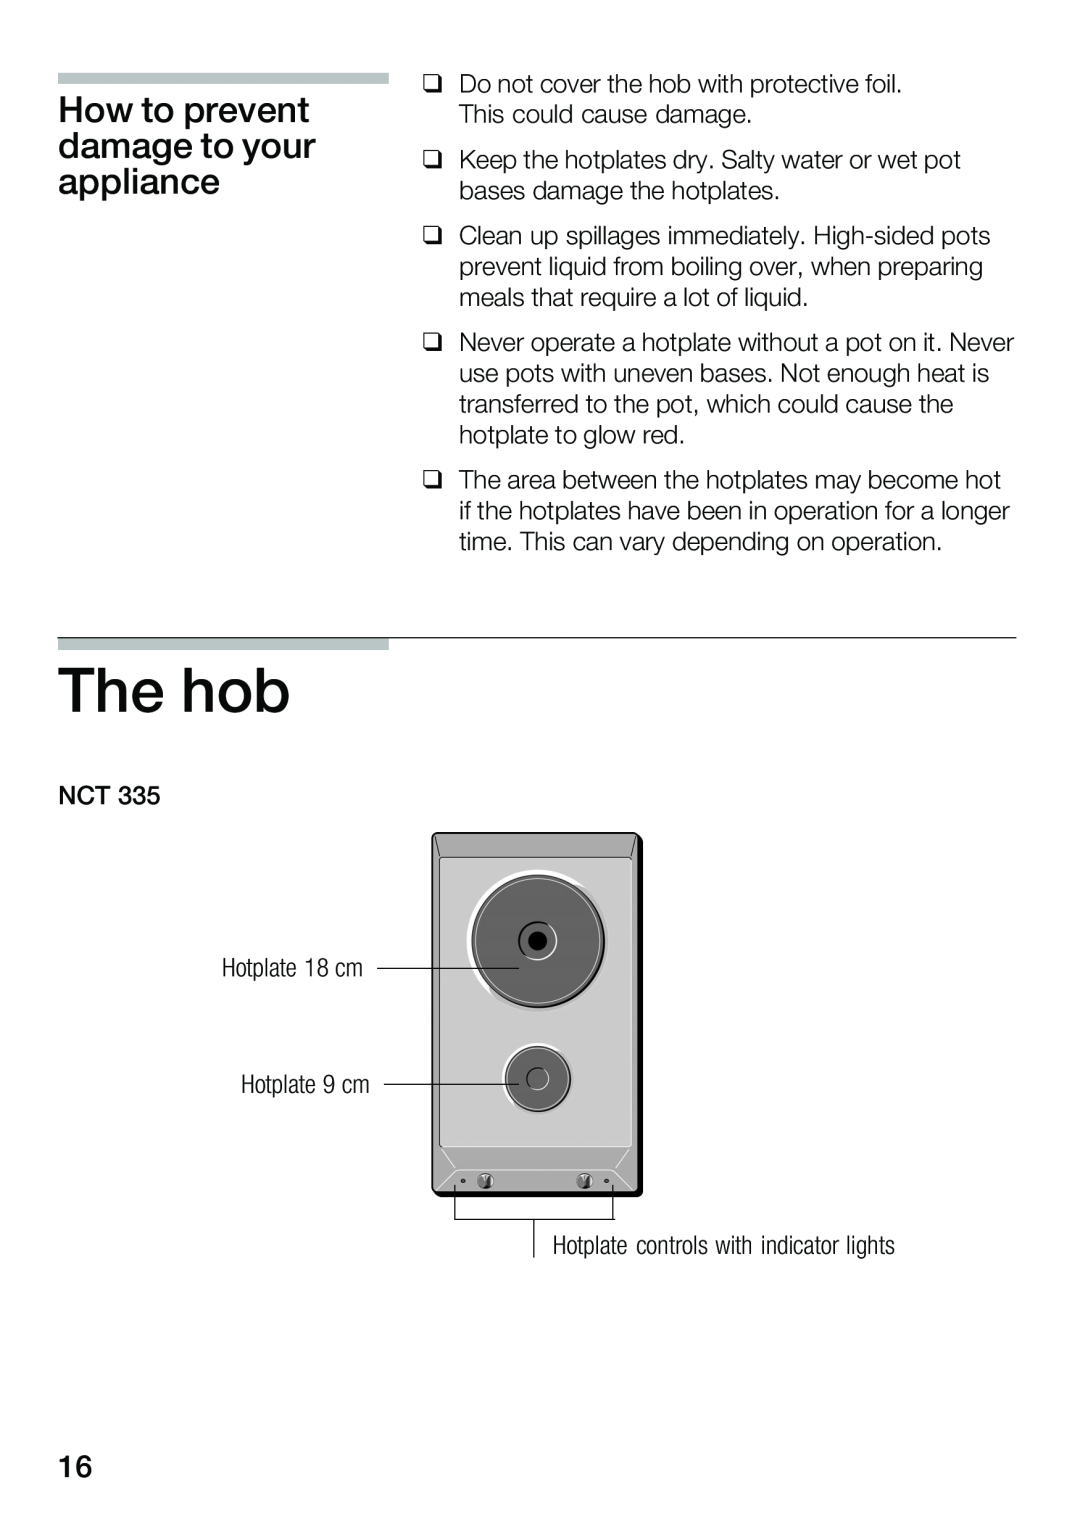 Smeg NCT 335 E instruction manual The hob, How to prevent damage to your appliance 